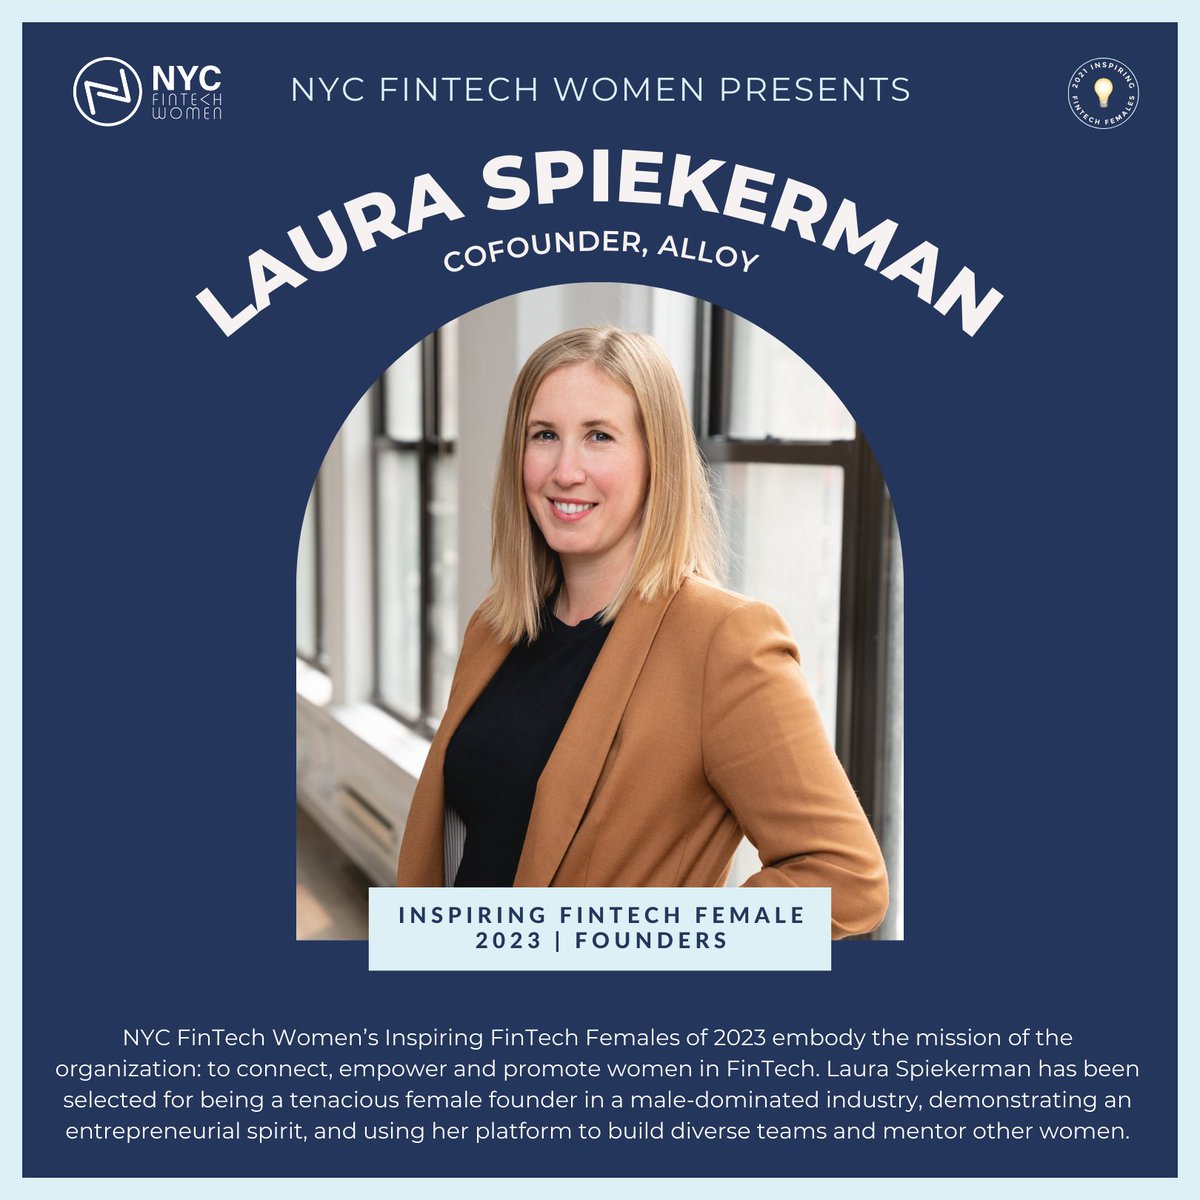 We are proud to share that @lauraspiekerman has been named to the @NYCFintechWomen #IFF2023 List alongside so many other incredible female founders and builders making an impact in the fintech community 🎉 💫 🚀 Check out the full list of honorees: nycfintechwomen.com/2023-inspiring…